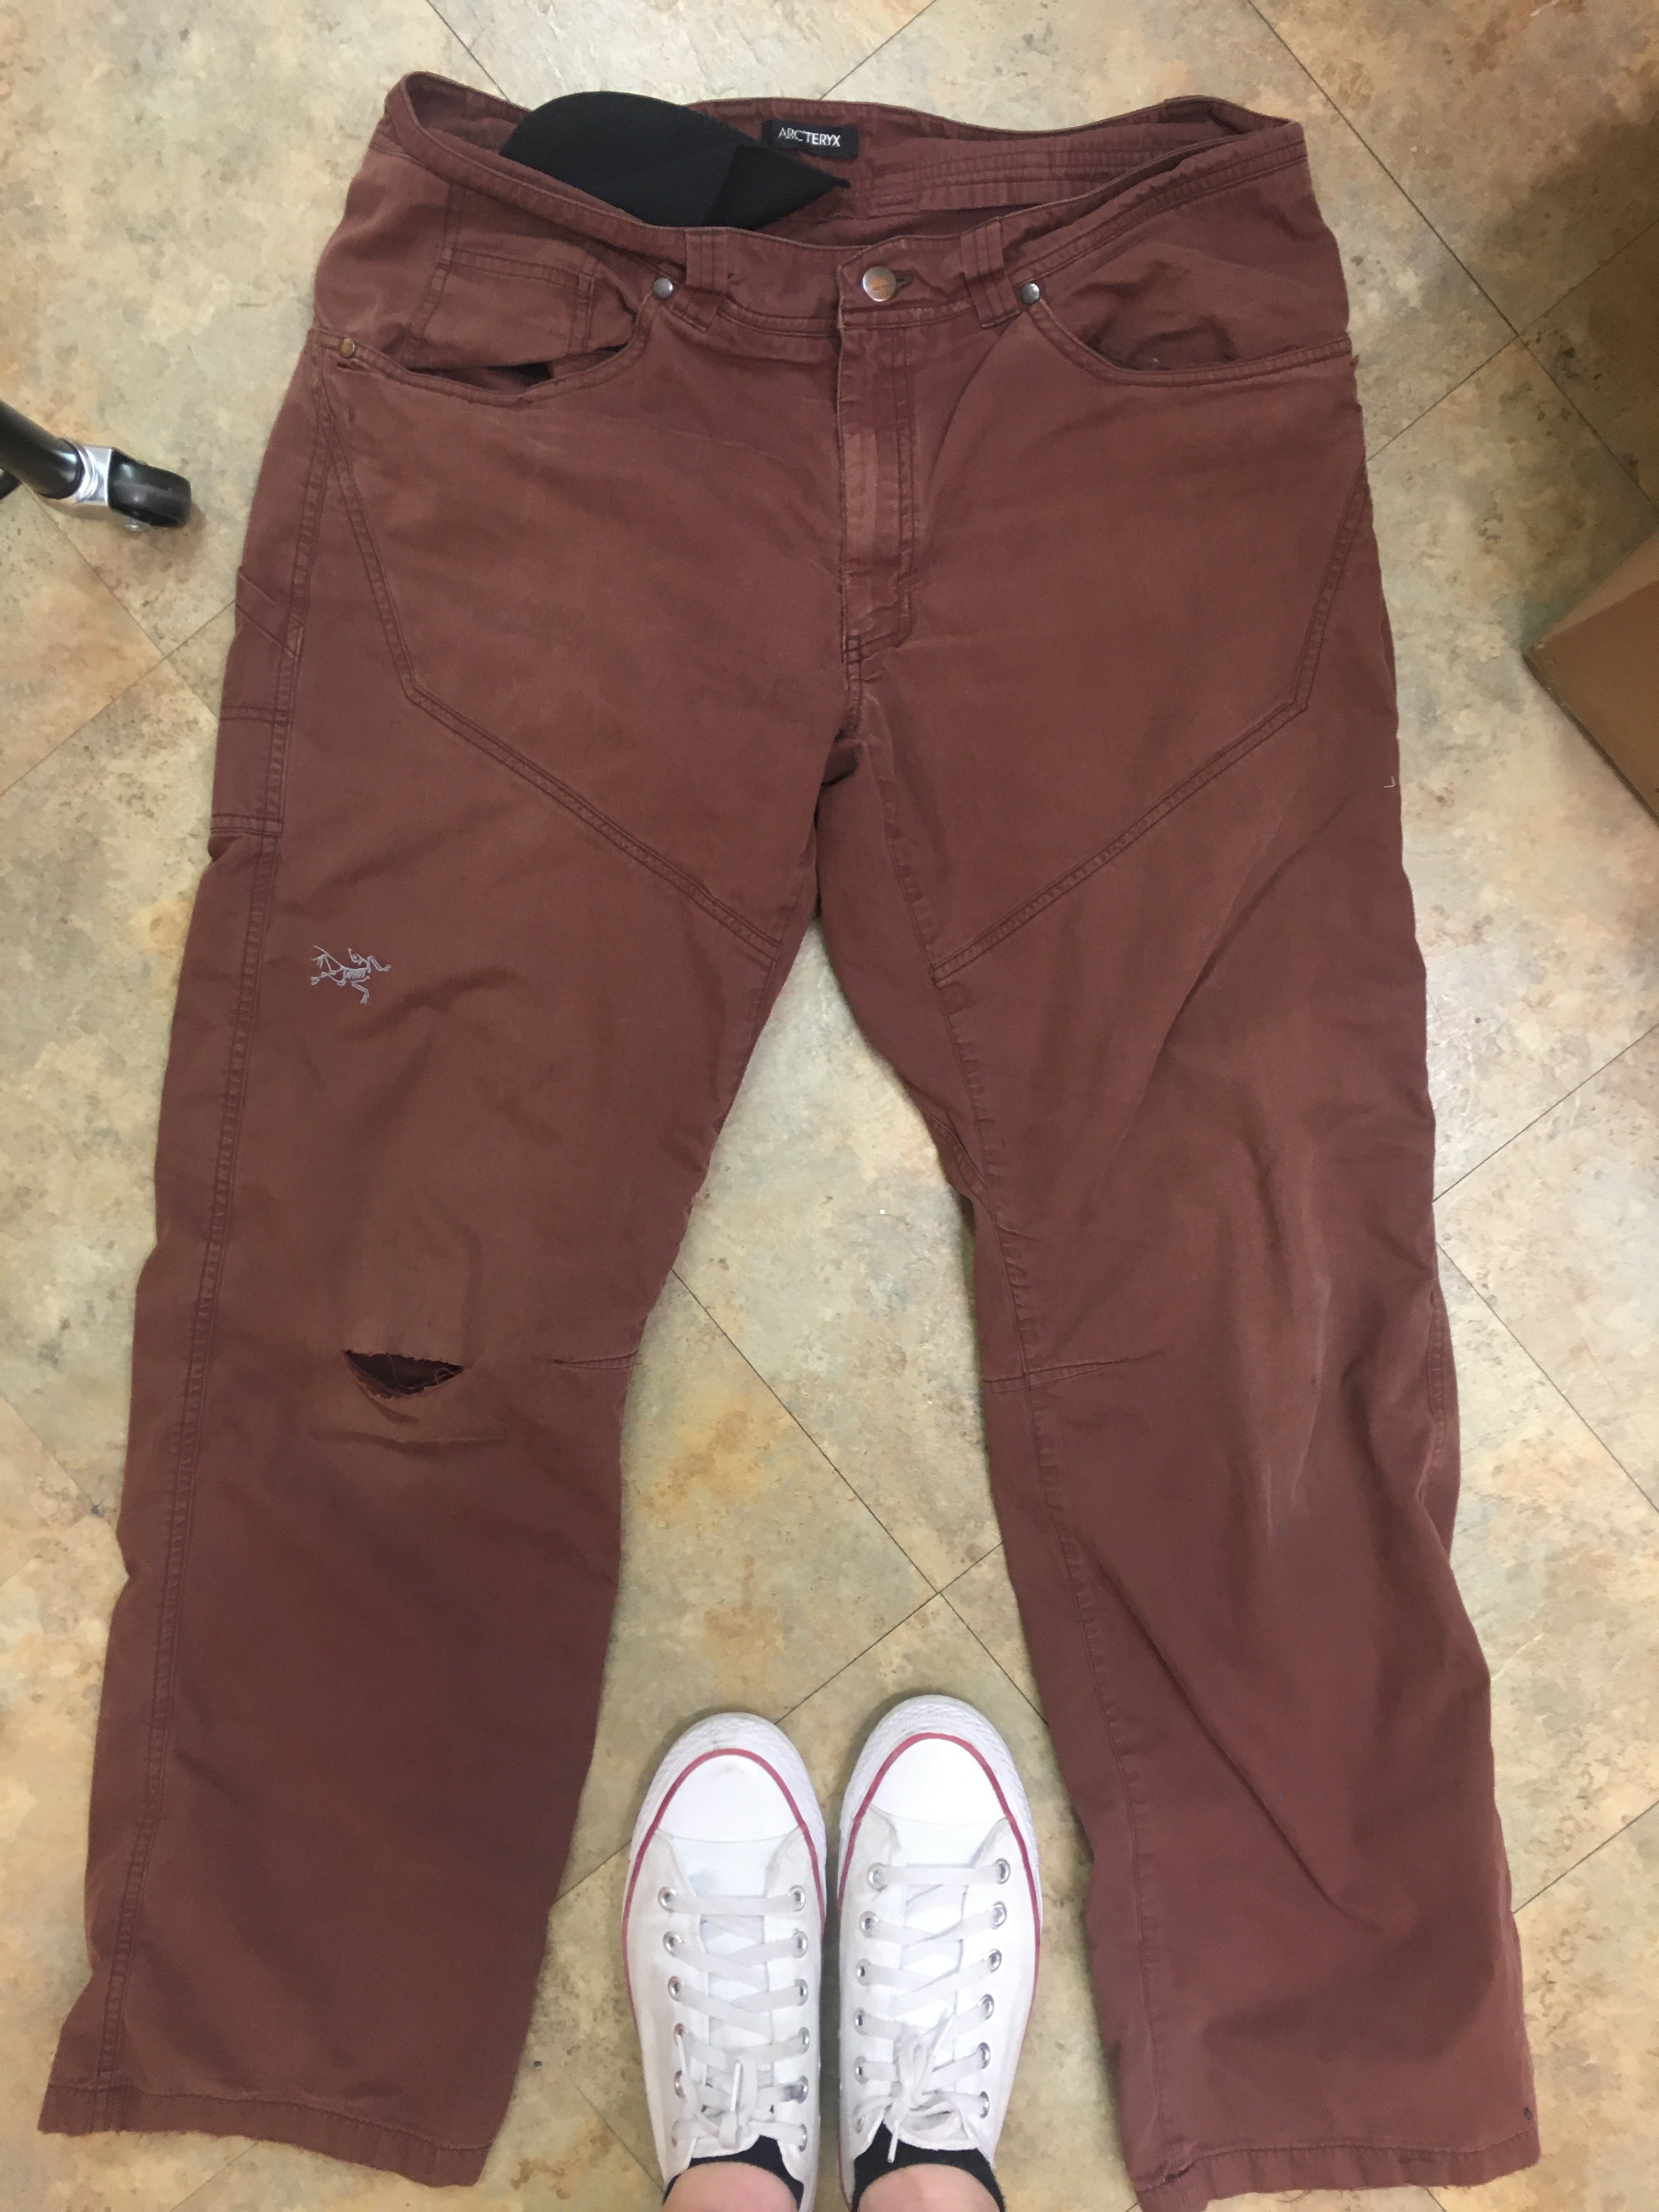 patched arcteryx trousers